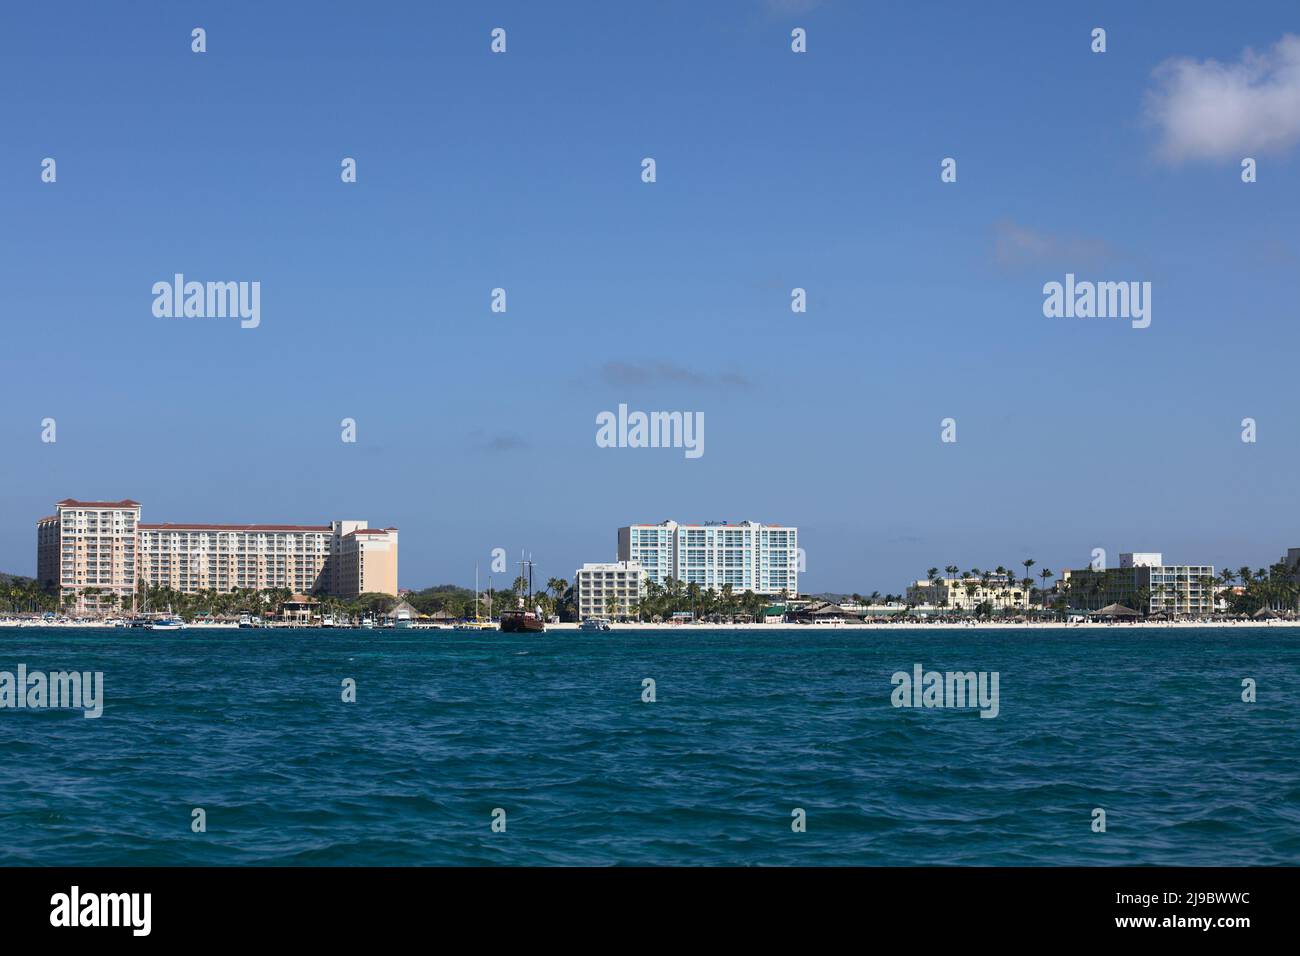 PALM BEACH, ARUBA - OCTOBER 17, 2021: View from the sea of the Marriott and Radisson Blu hotels and the Holiday Inn Resort along Palm Beach, Aruba Stock Photo